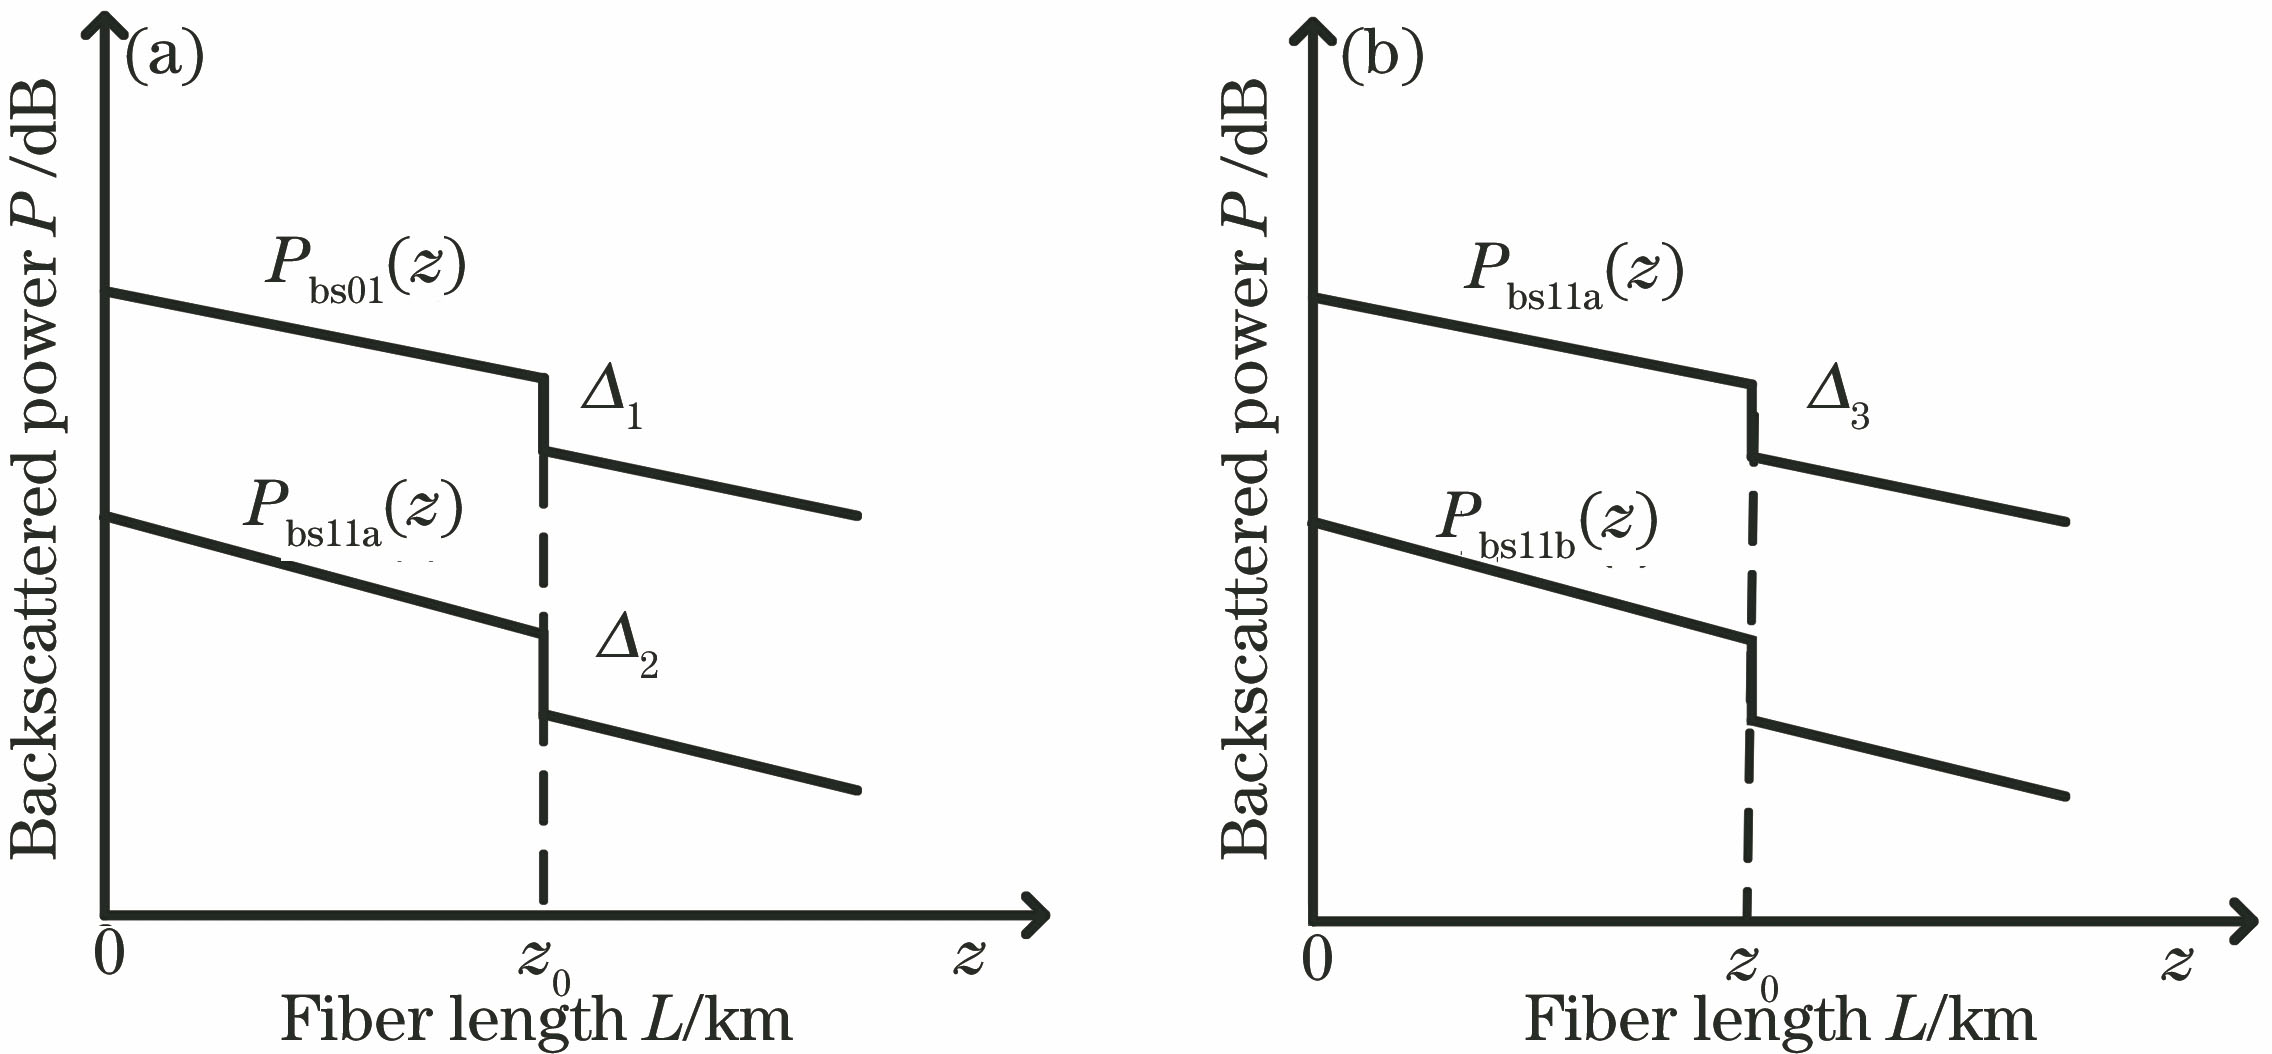 Rayleigh backscattering power distribution. (a) LP01 mode excited; (b) LP11a mode excited